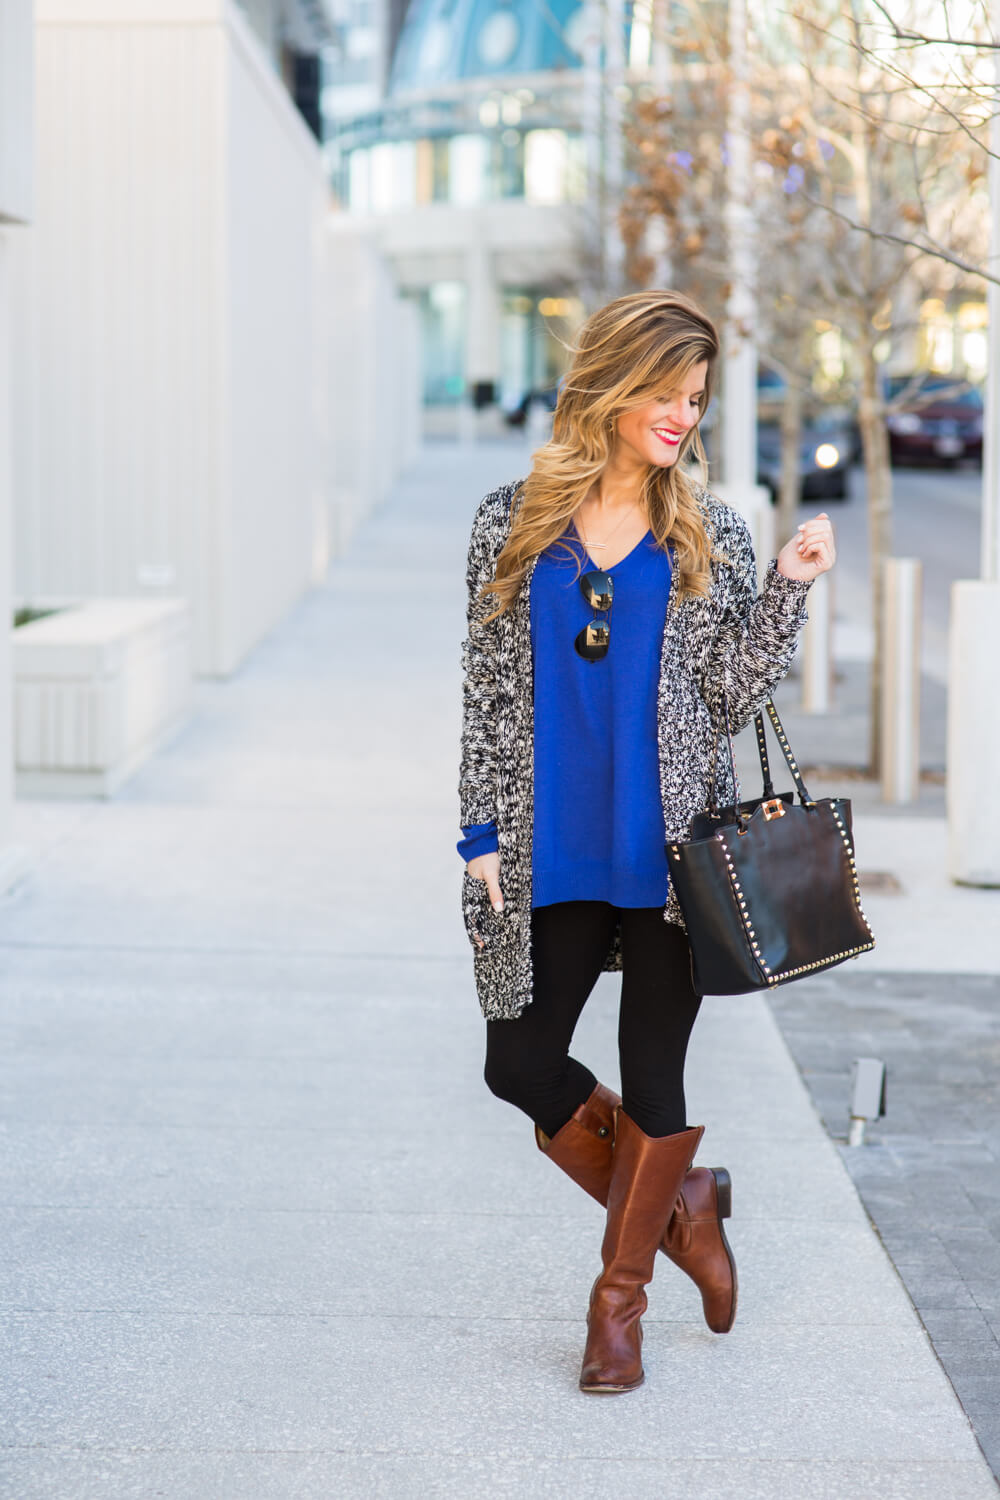 The Best Winter Outfit? A Sweater Dress + Boots - The Mom Edit